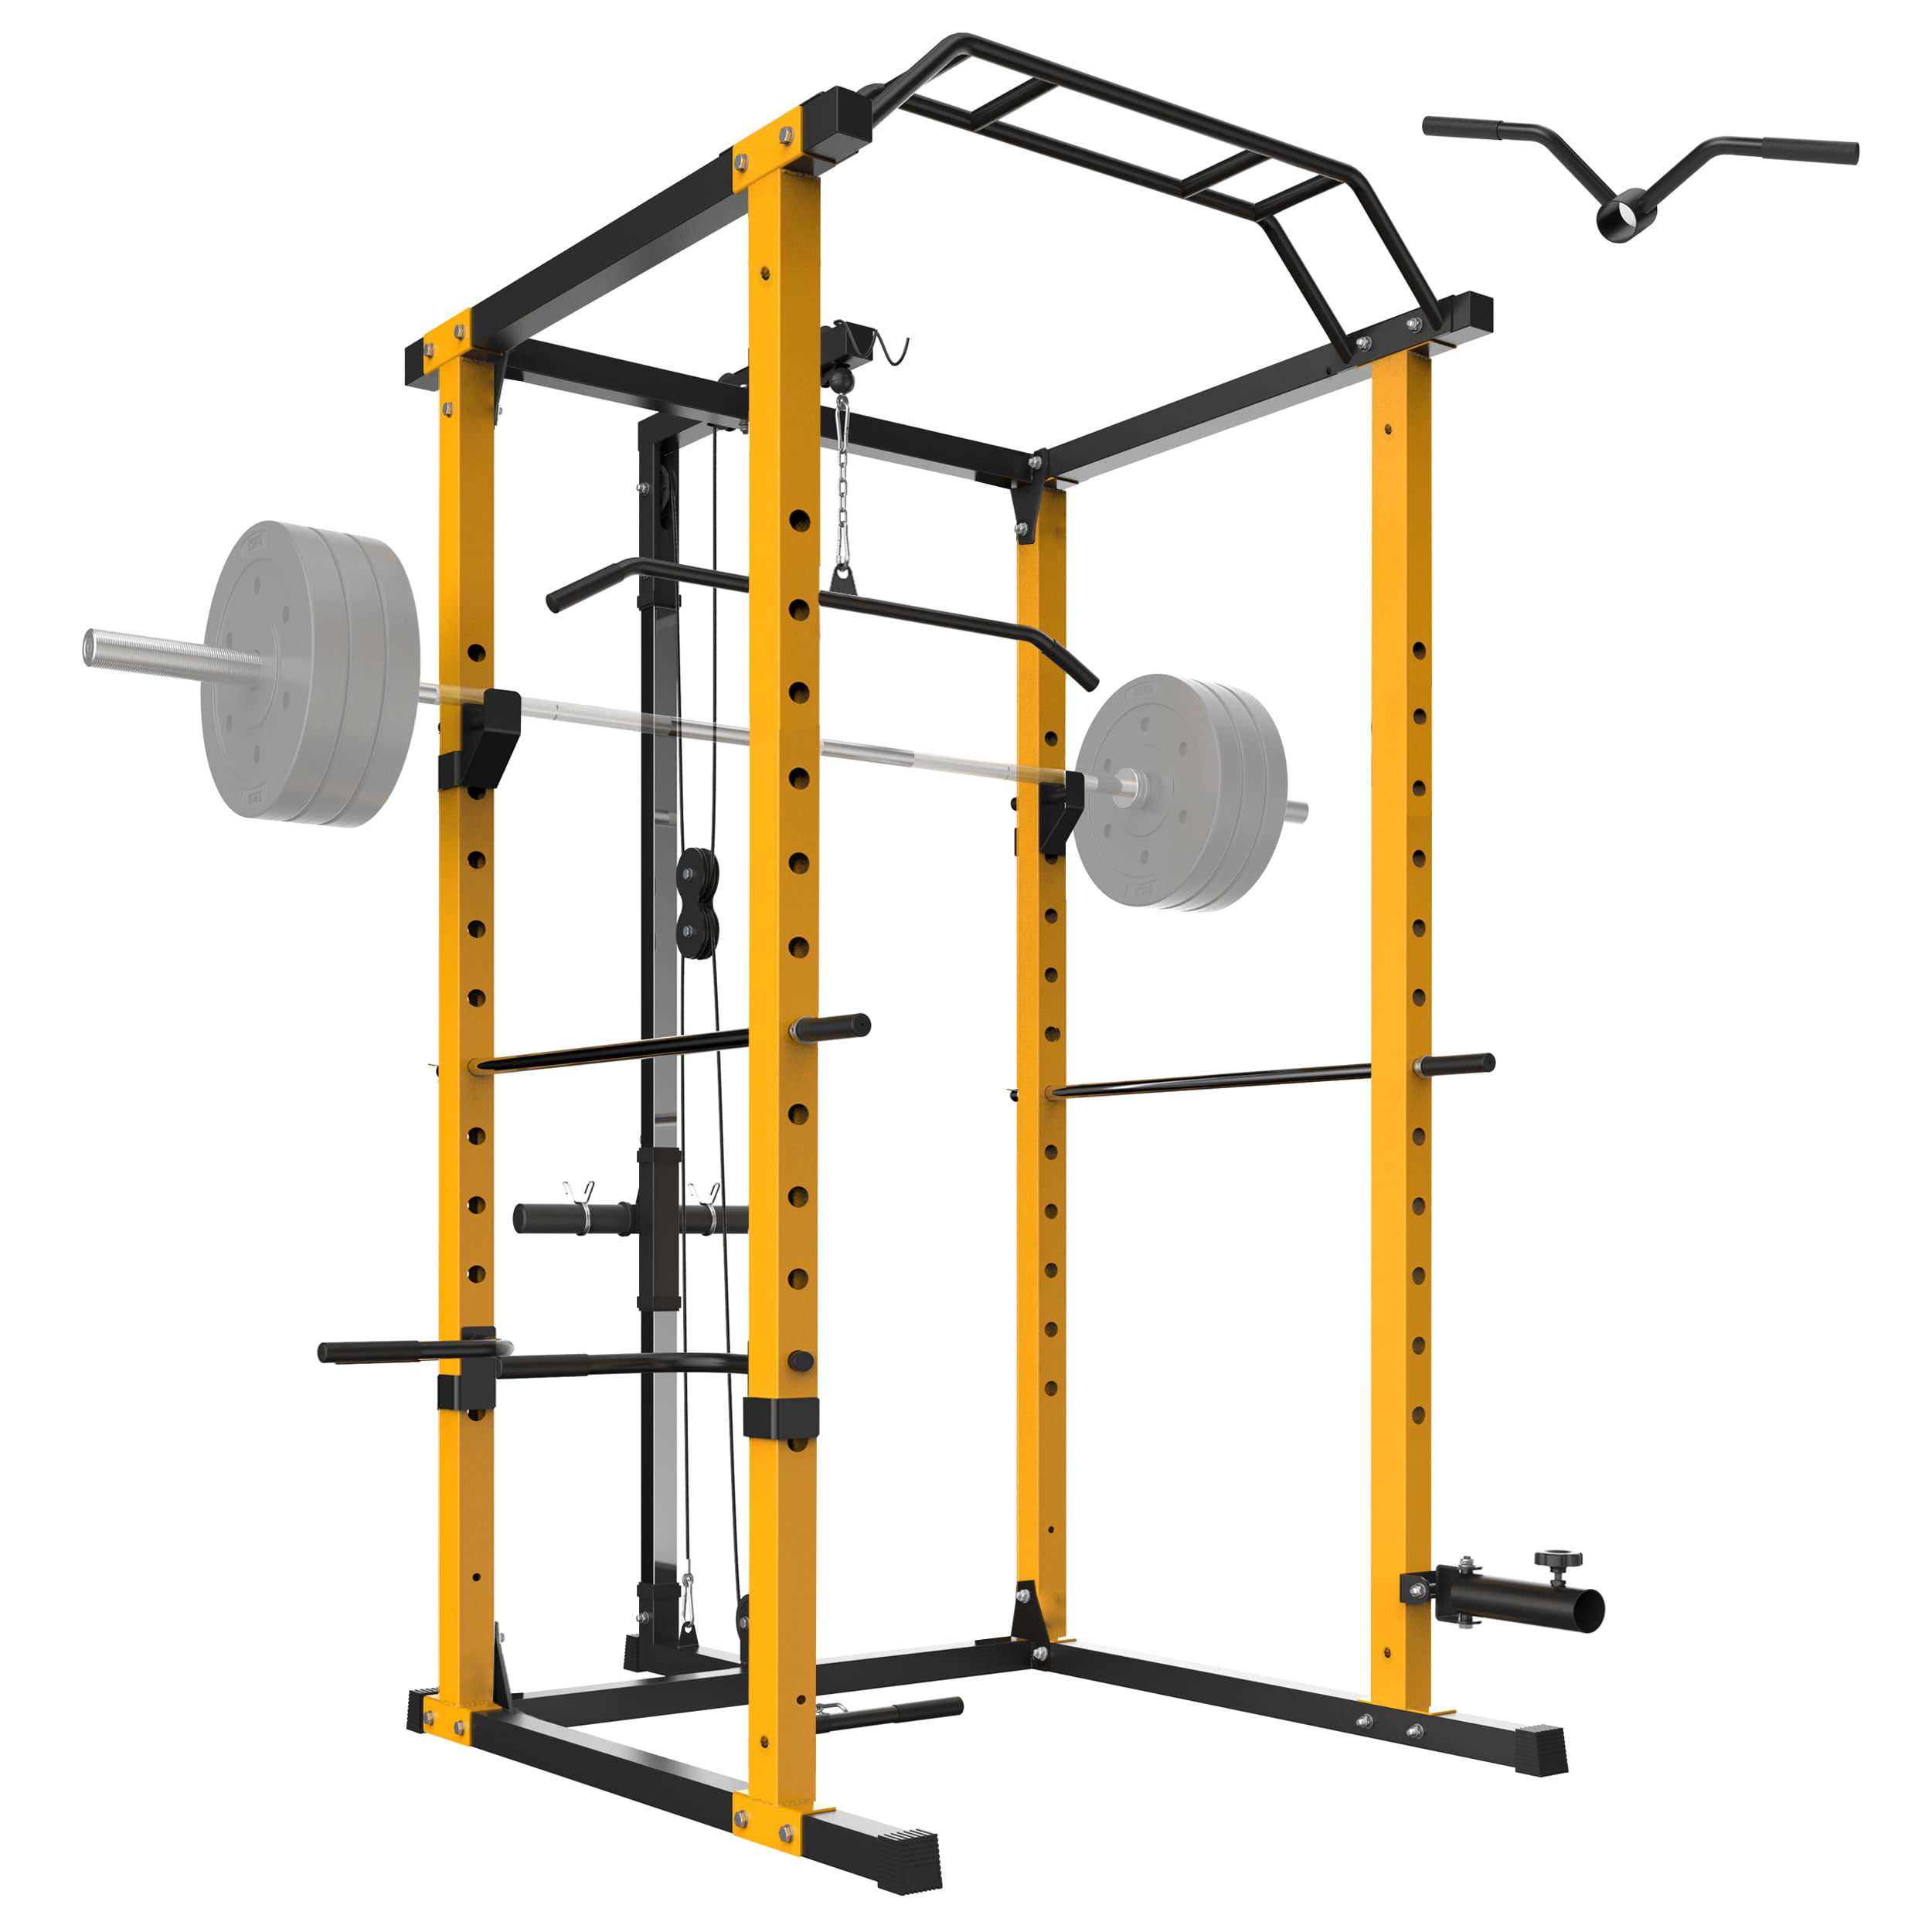 US.Stock 1000-Pound Capacity Olympic Power Cage,Multi-Function Adjustable Light Commercial Weight Cage with LAT Pull-Down Pulley System,360 Degree Swivel with Up and Down Directions yarino 